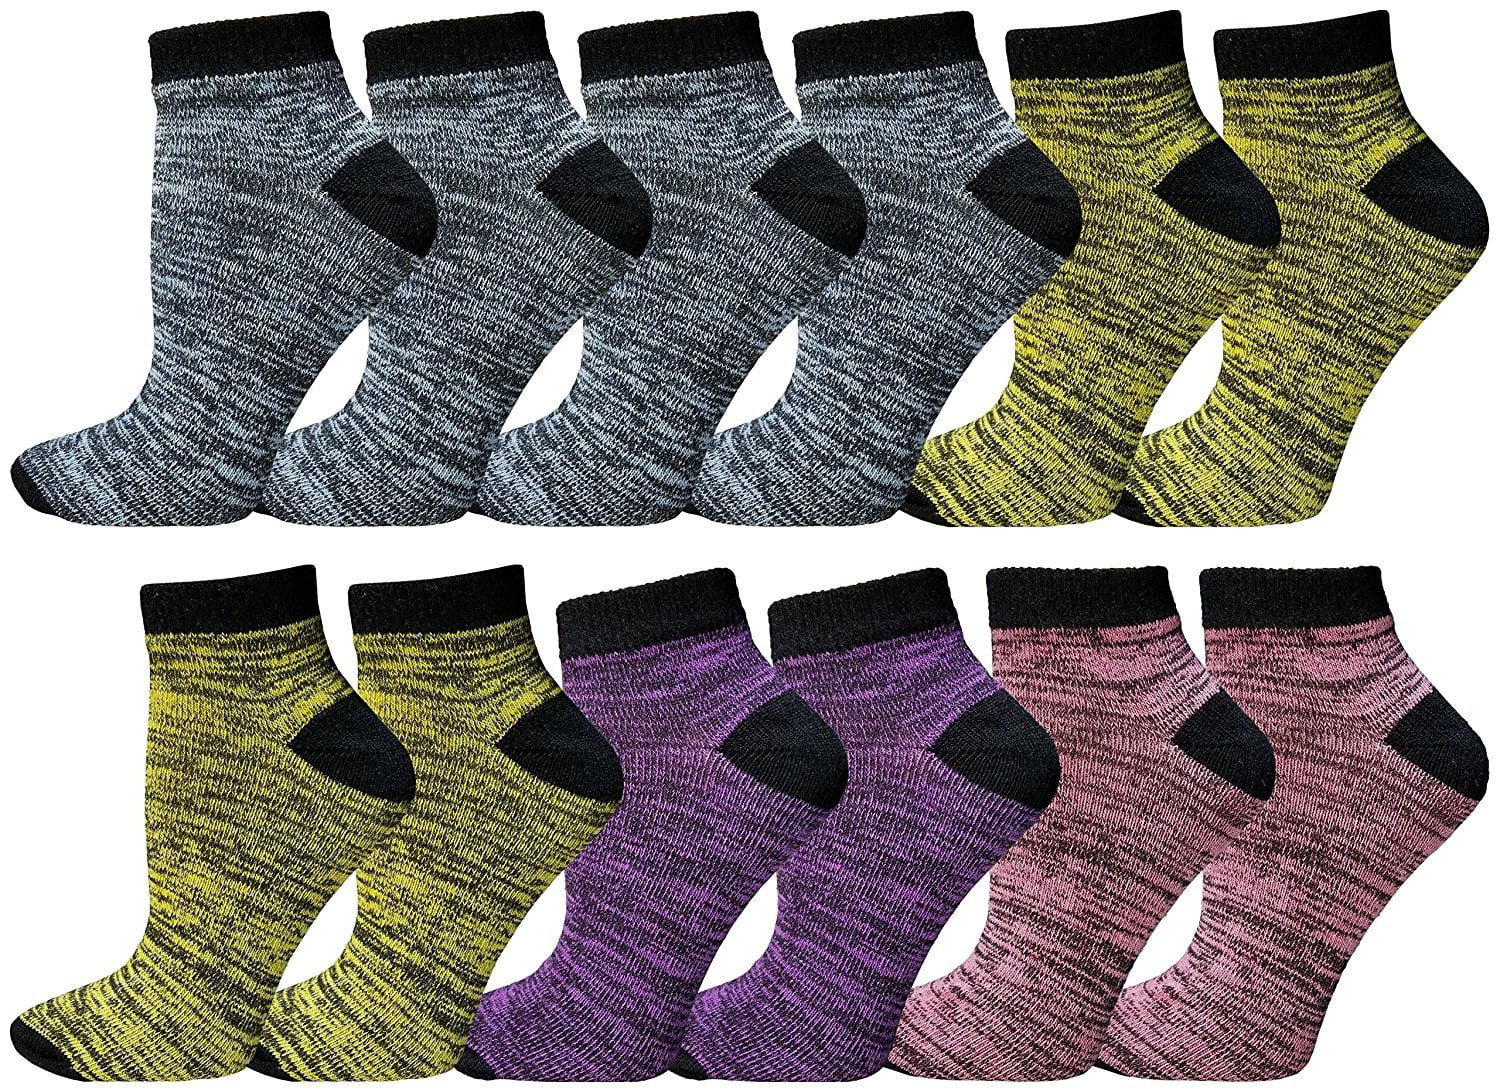 Cotton Ankle Socks for Women, 12 Pairs Bulk Pack, Low Cut Cute Colorful ...